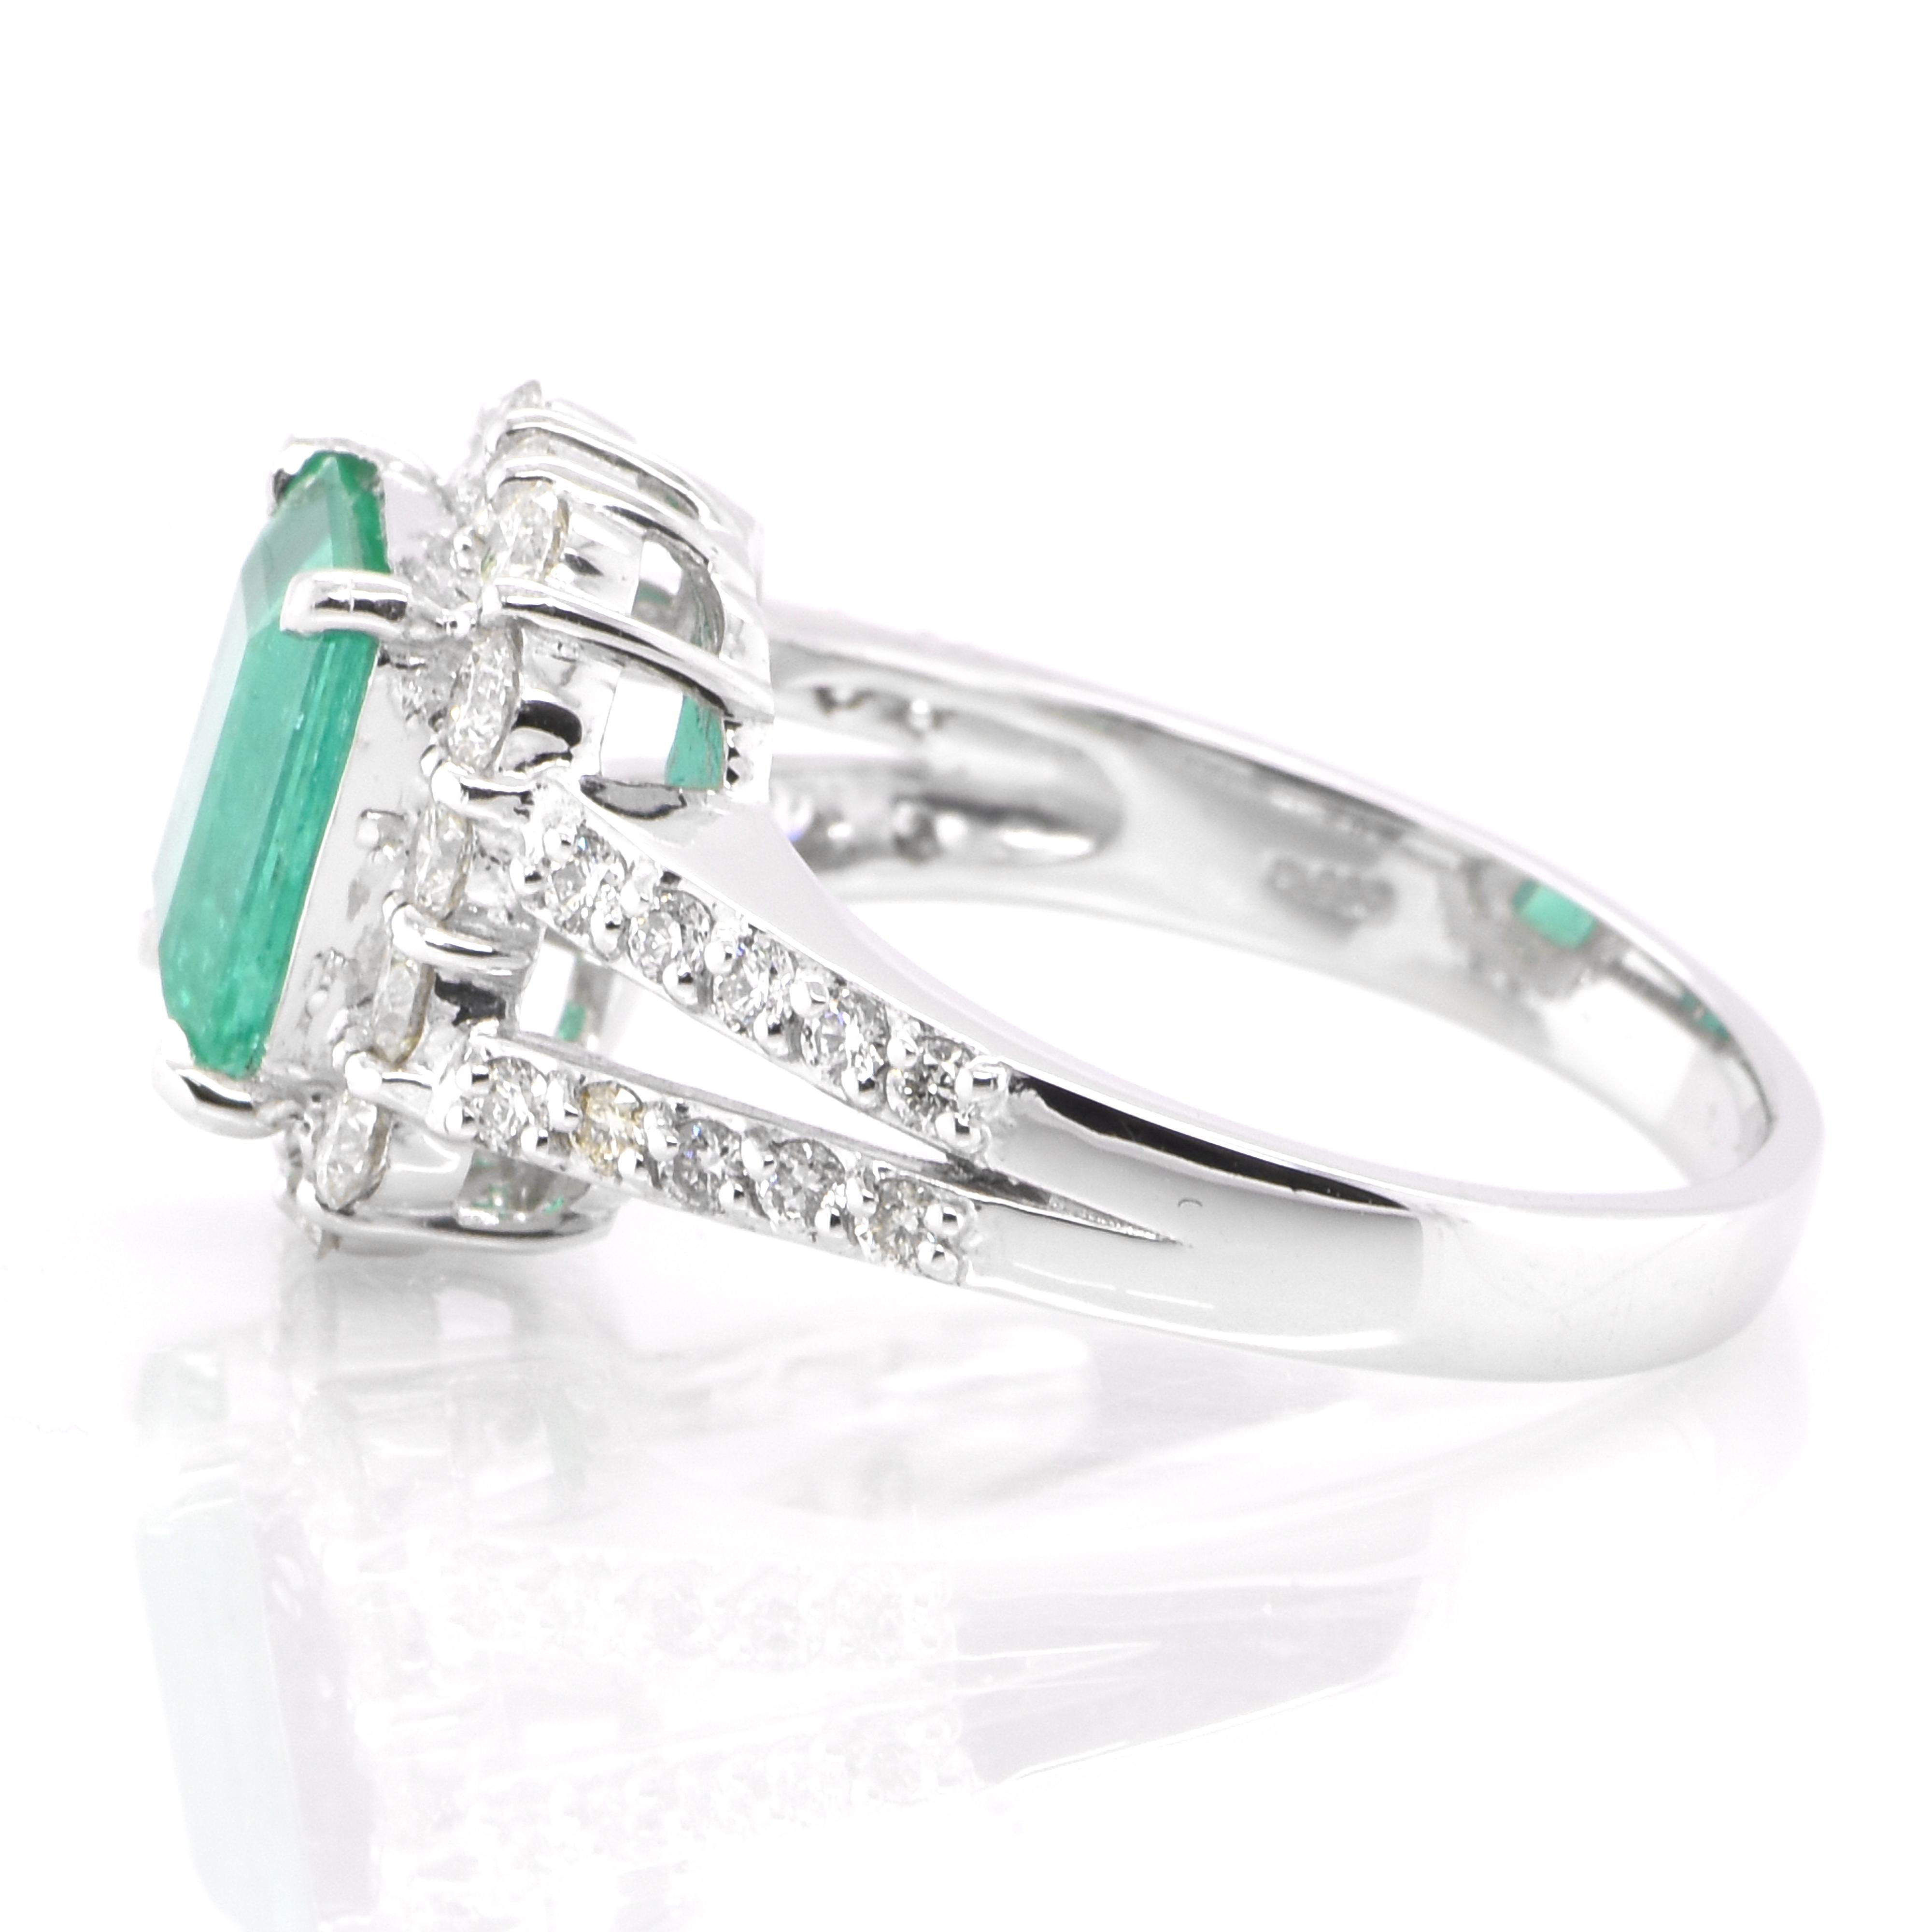 Emerald Cut 1.64 Carat Natural Emerald and Diamond Halo Ring Set in Platinum For Sale